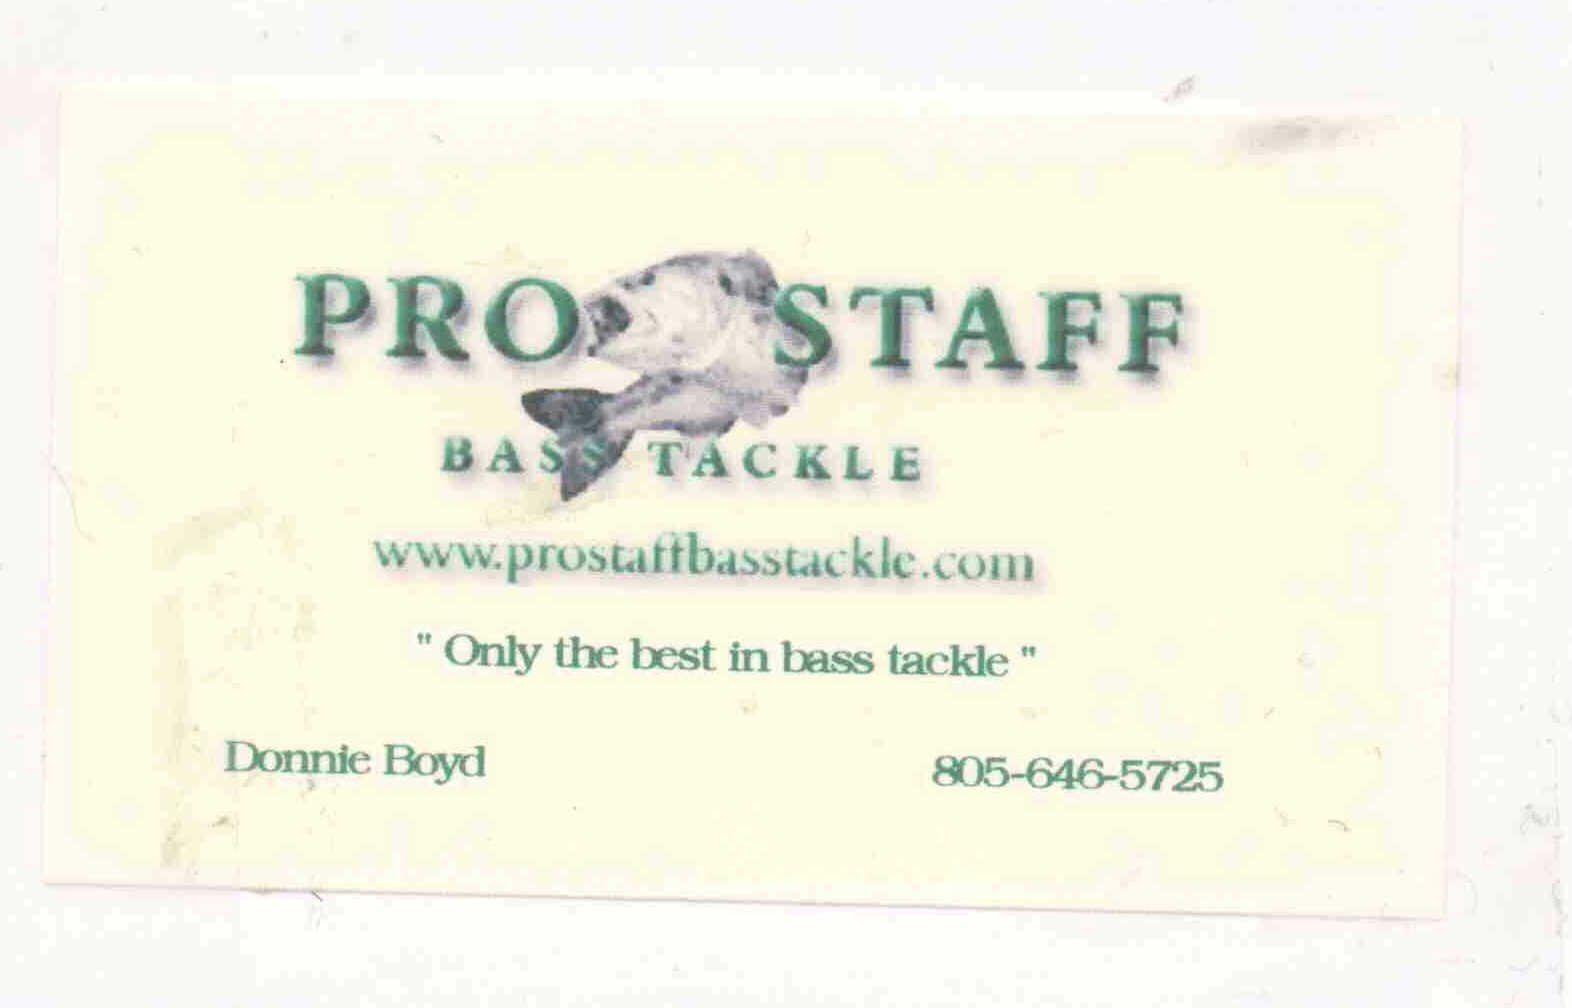  PRO STAFF BASS TACKLE WWW.PROSTAFFBASSTACKLE.COM "ONLY THE BEST IN BASS TACKLE"